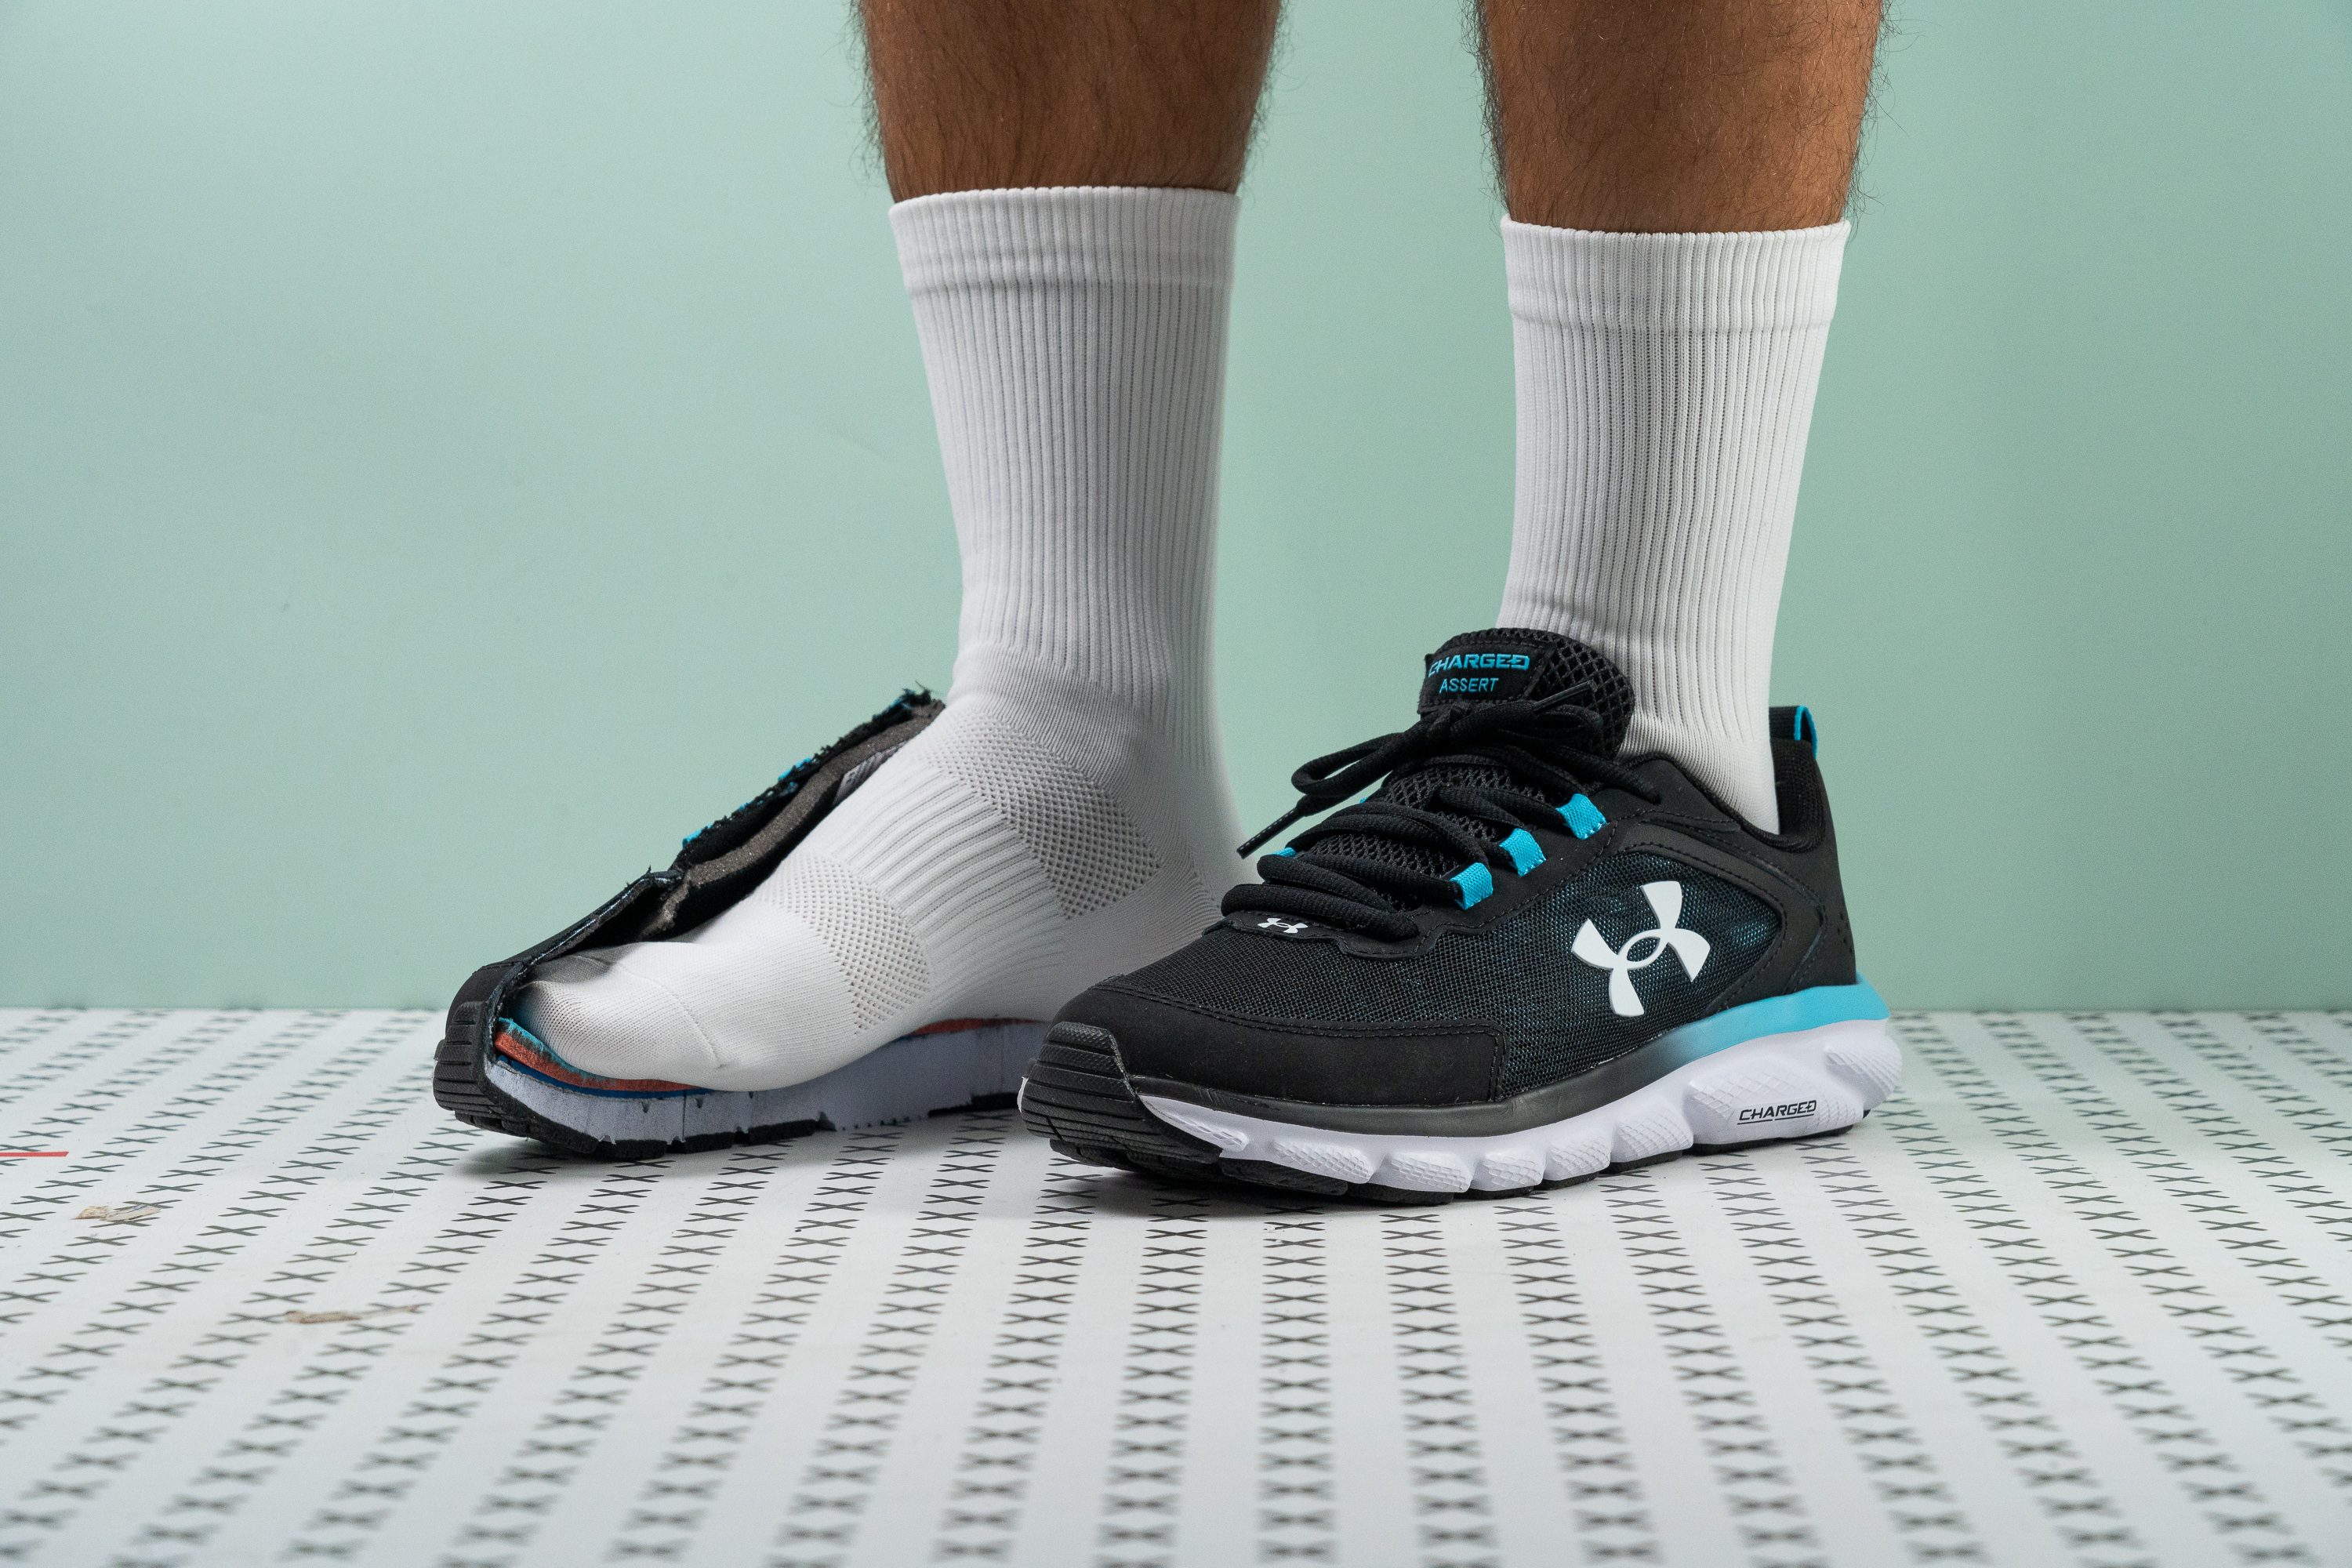 Under Armour Tribase Reign - Review y opiniones en